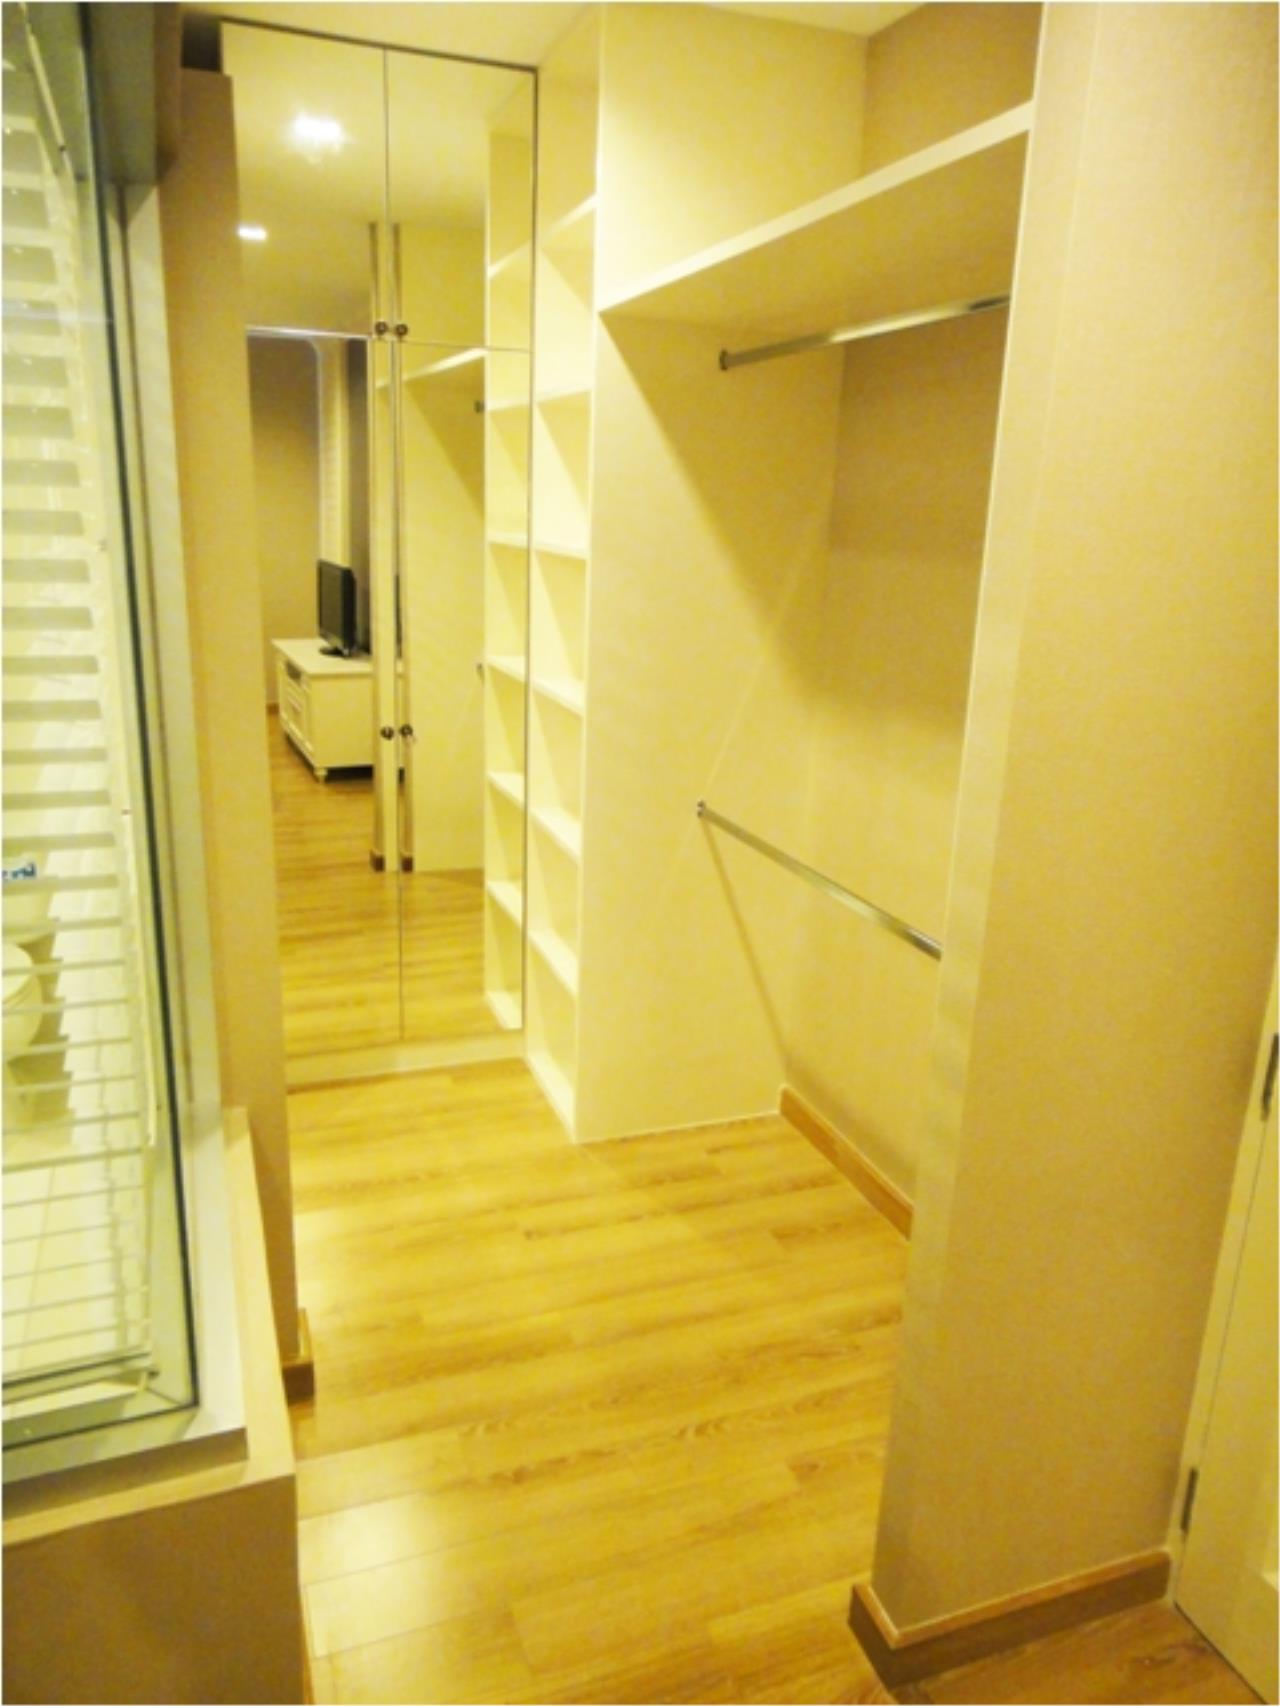 Piri Property Agency's one bedroom  For Rent The Seed Memories Siam 6